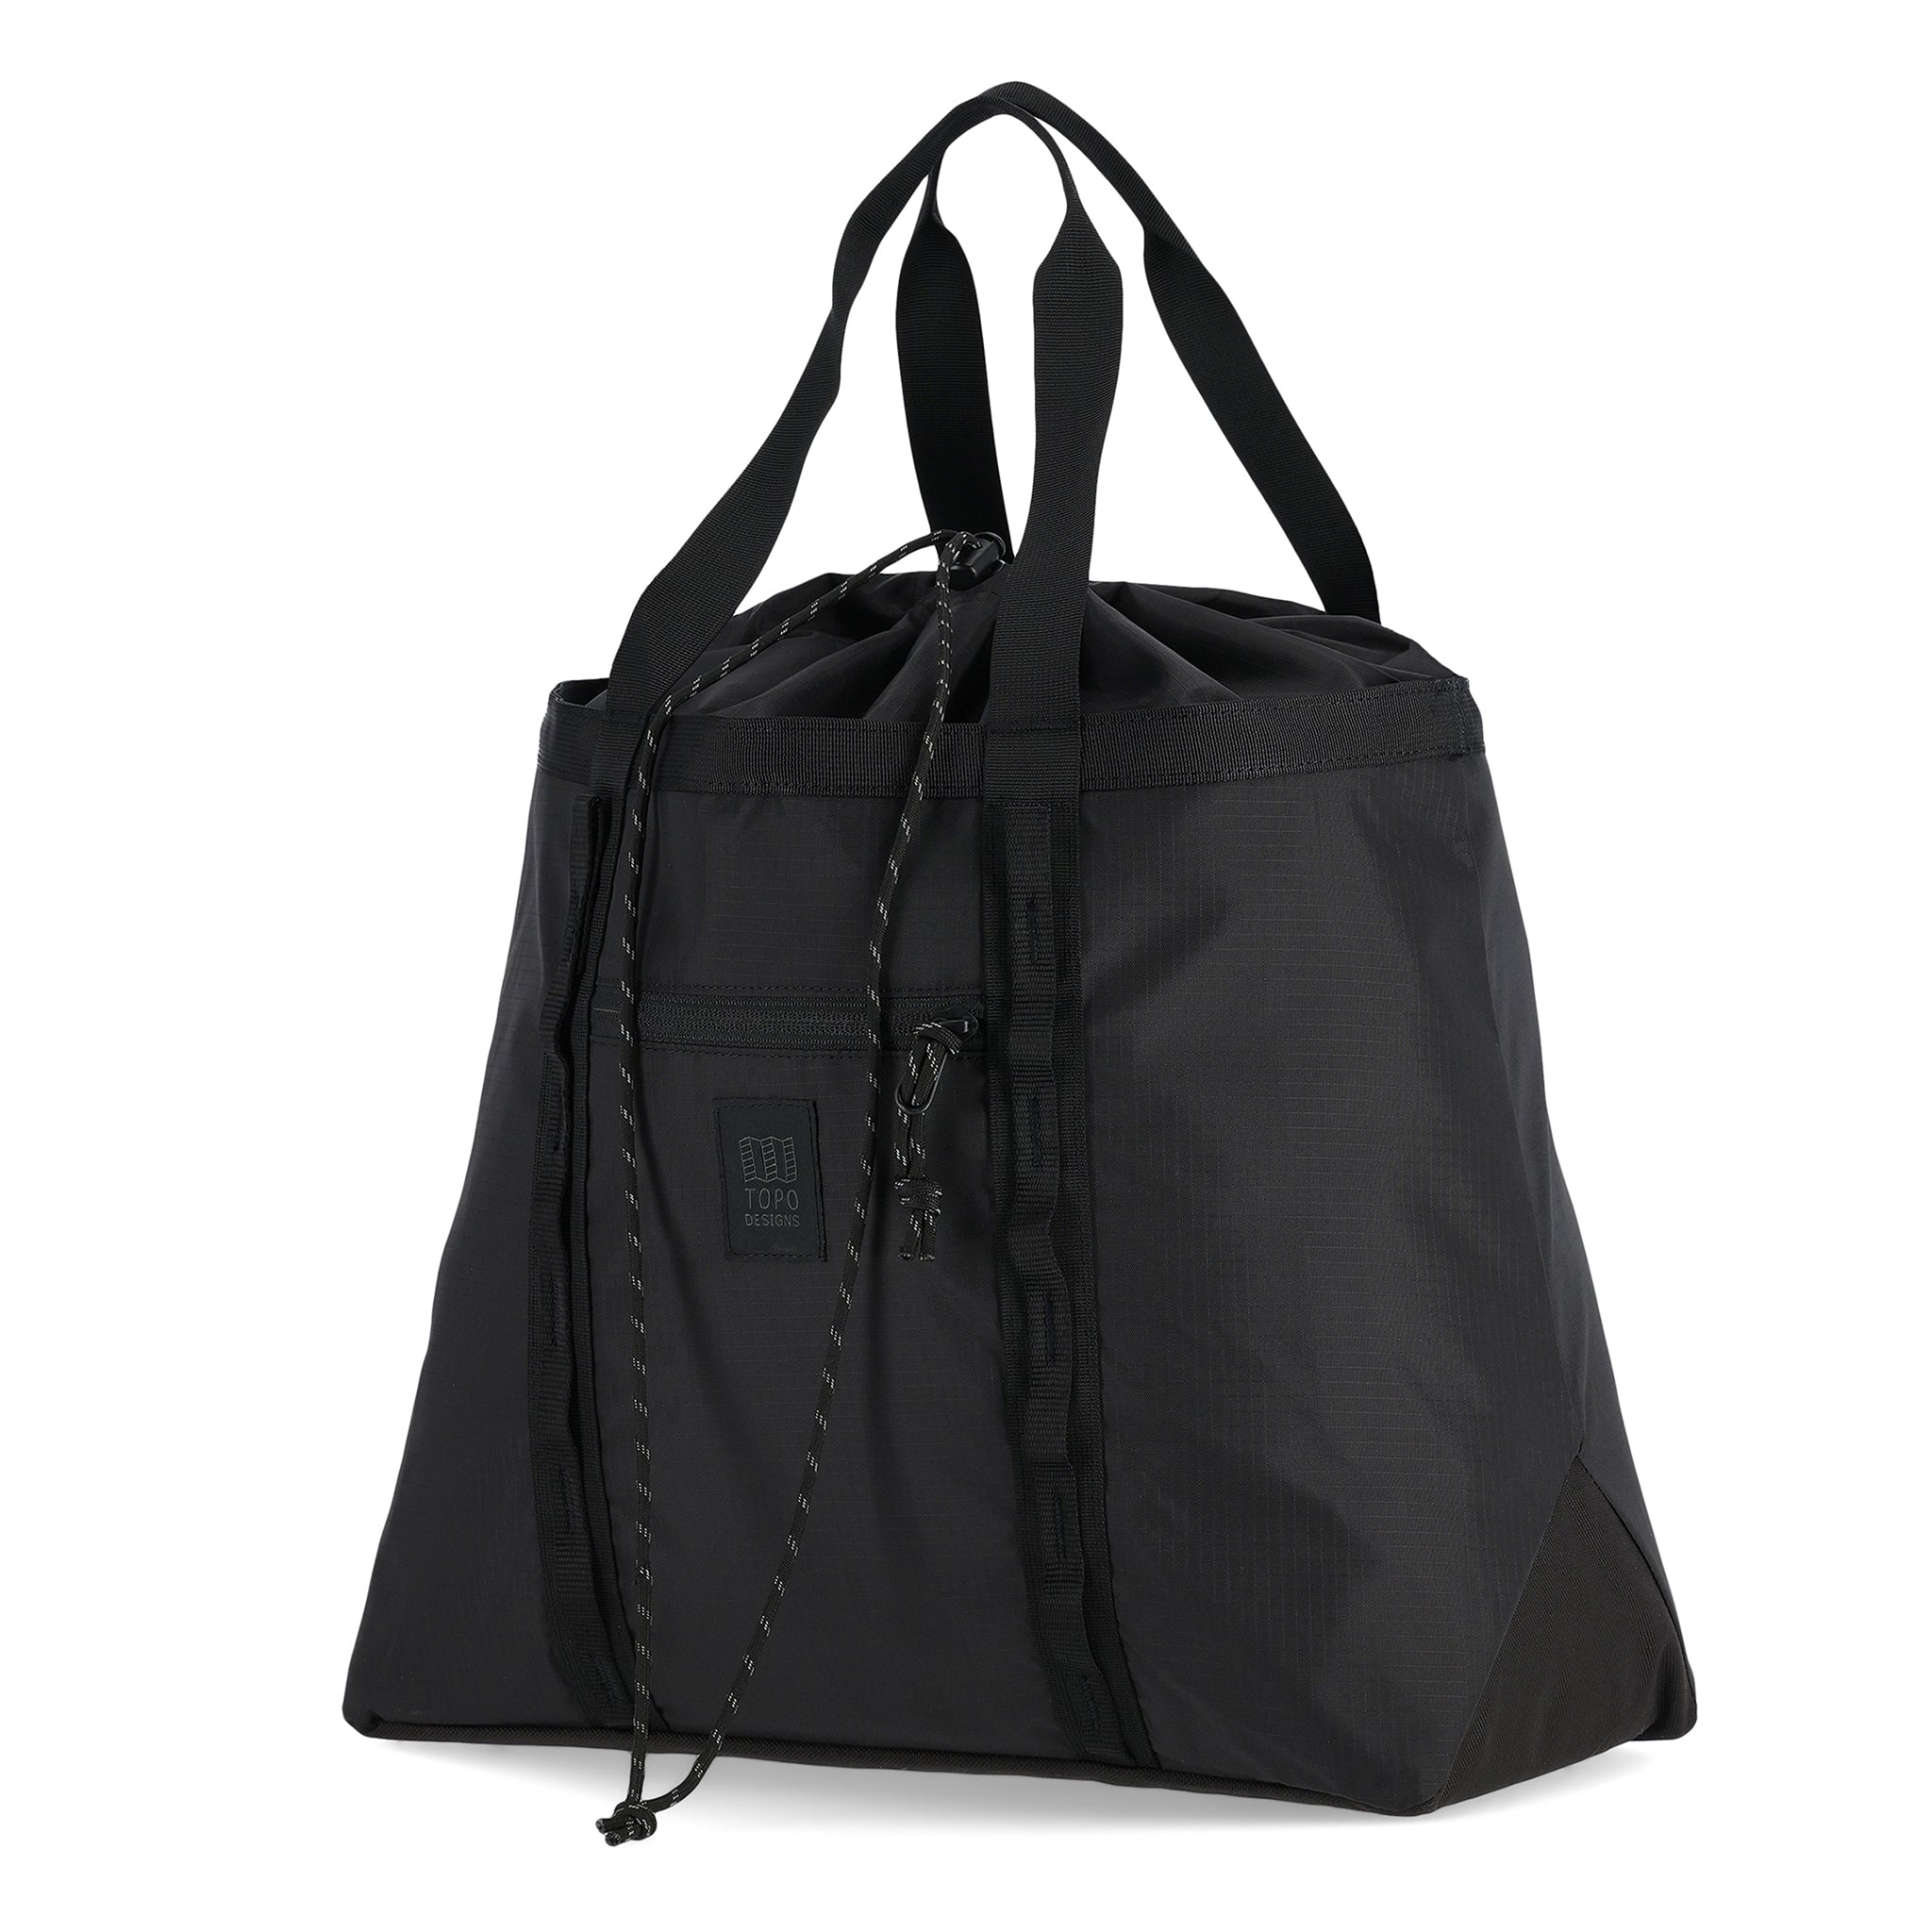 Side view Topo Designs Mountain Utility Tote Bag hauler in lightweight recycled "Black" nylon.